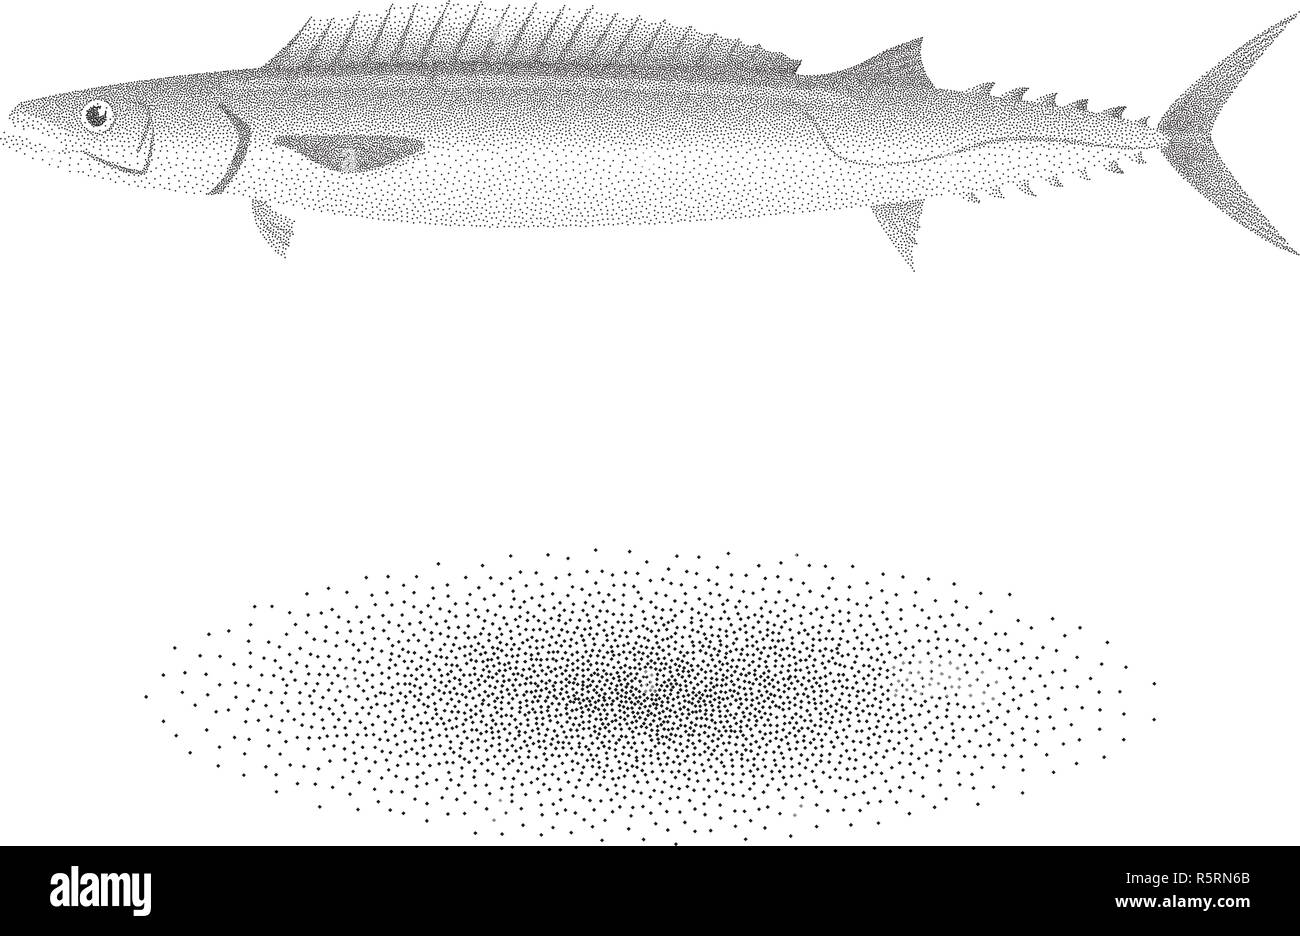 Barracouta fish with stipple effect in black and white Stock Vector